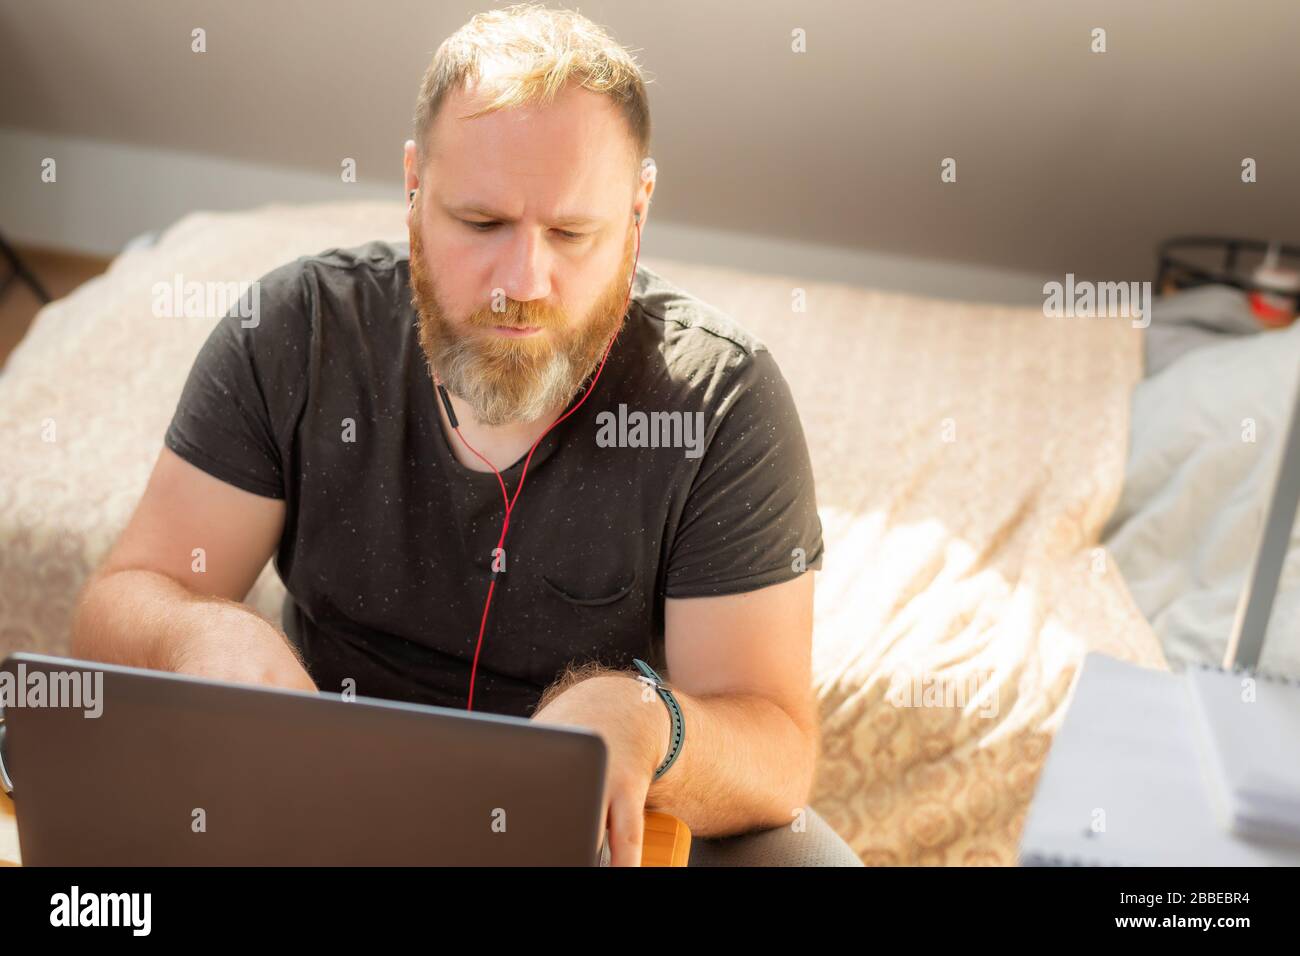 Work from home because pandemic. Remote office. IT specialist conduct online meetings Stock Photo